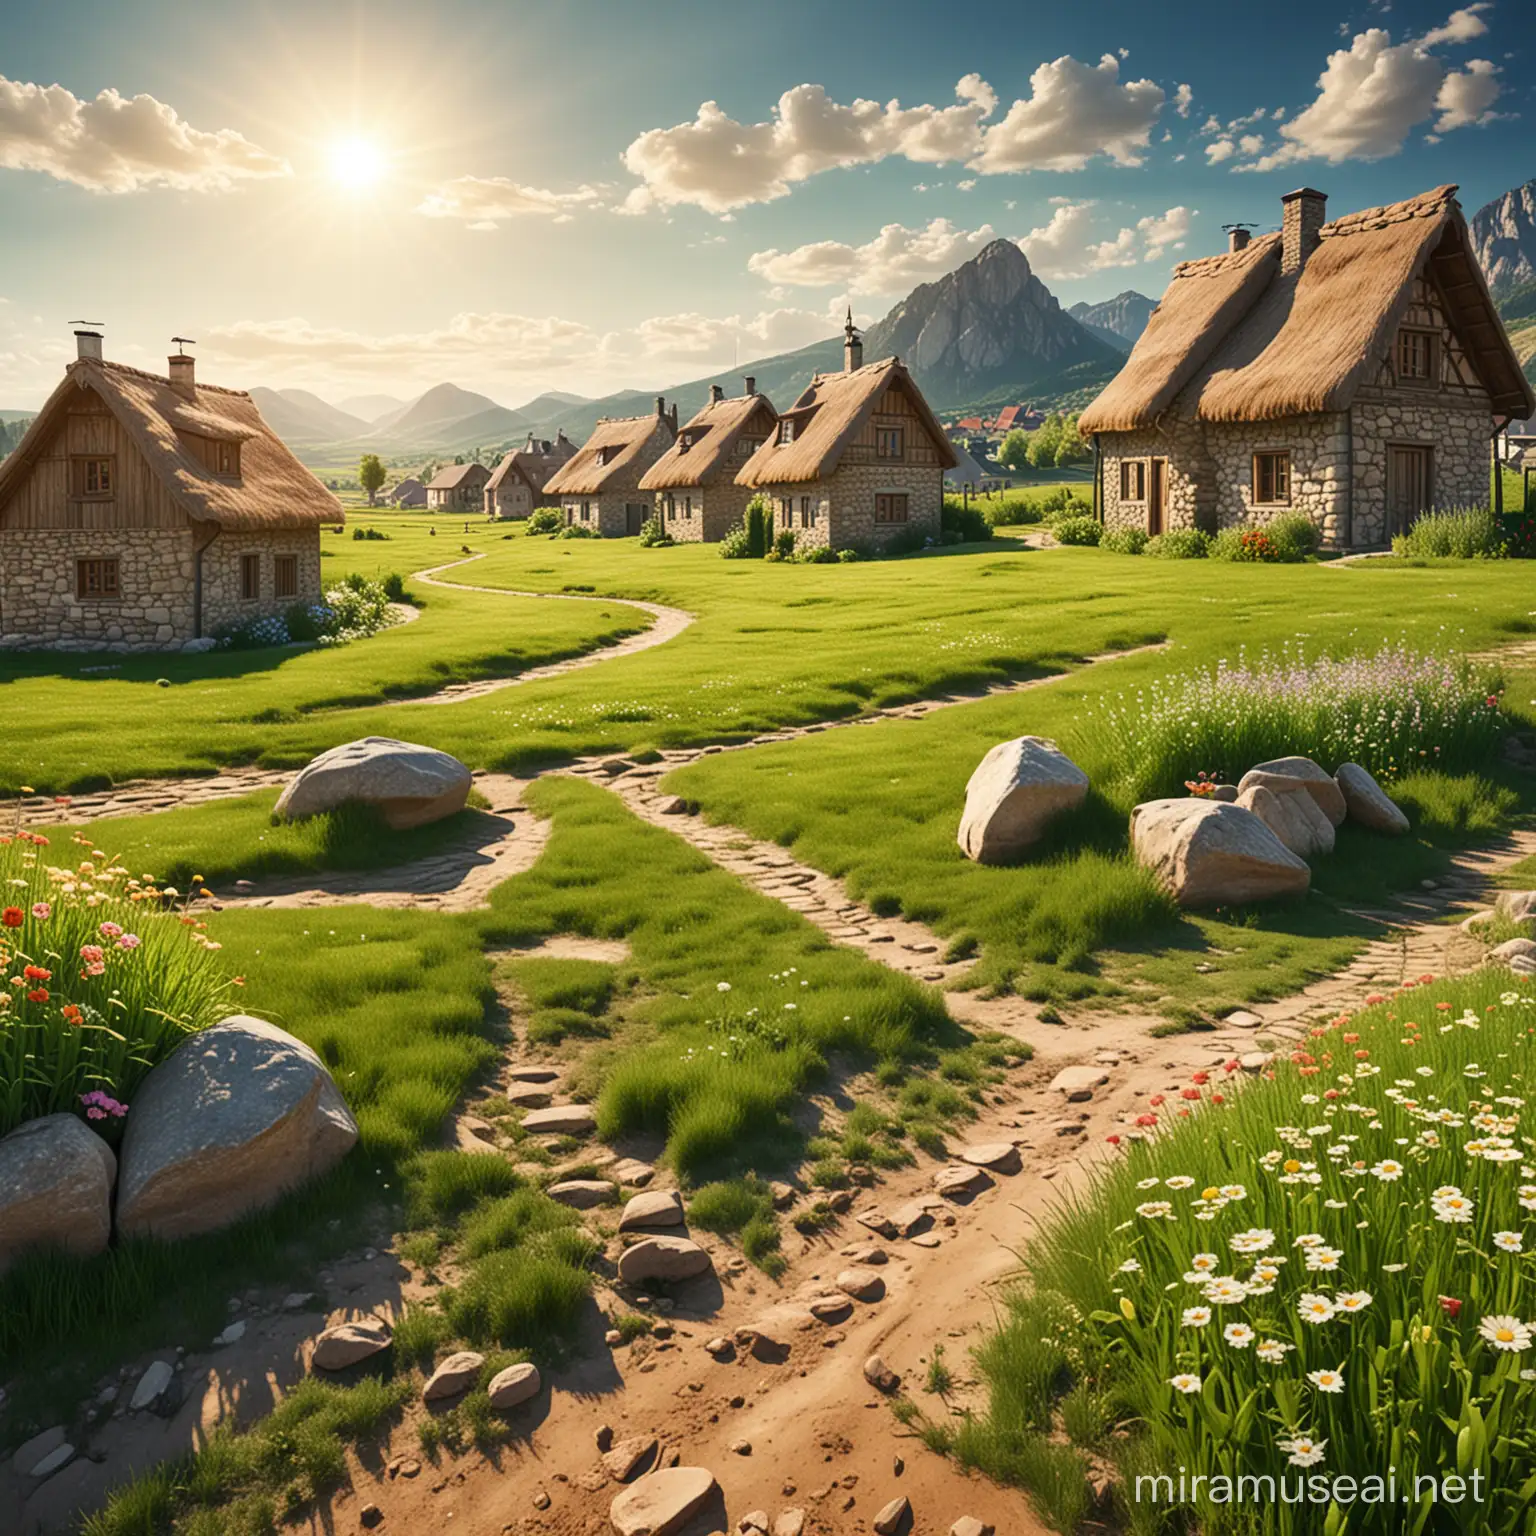 Stylized green field with grass and pretty flowers. On the field there is a small village with a few houses made of rocks and dirt. The sun is shining